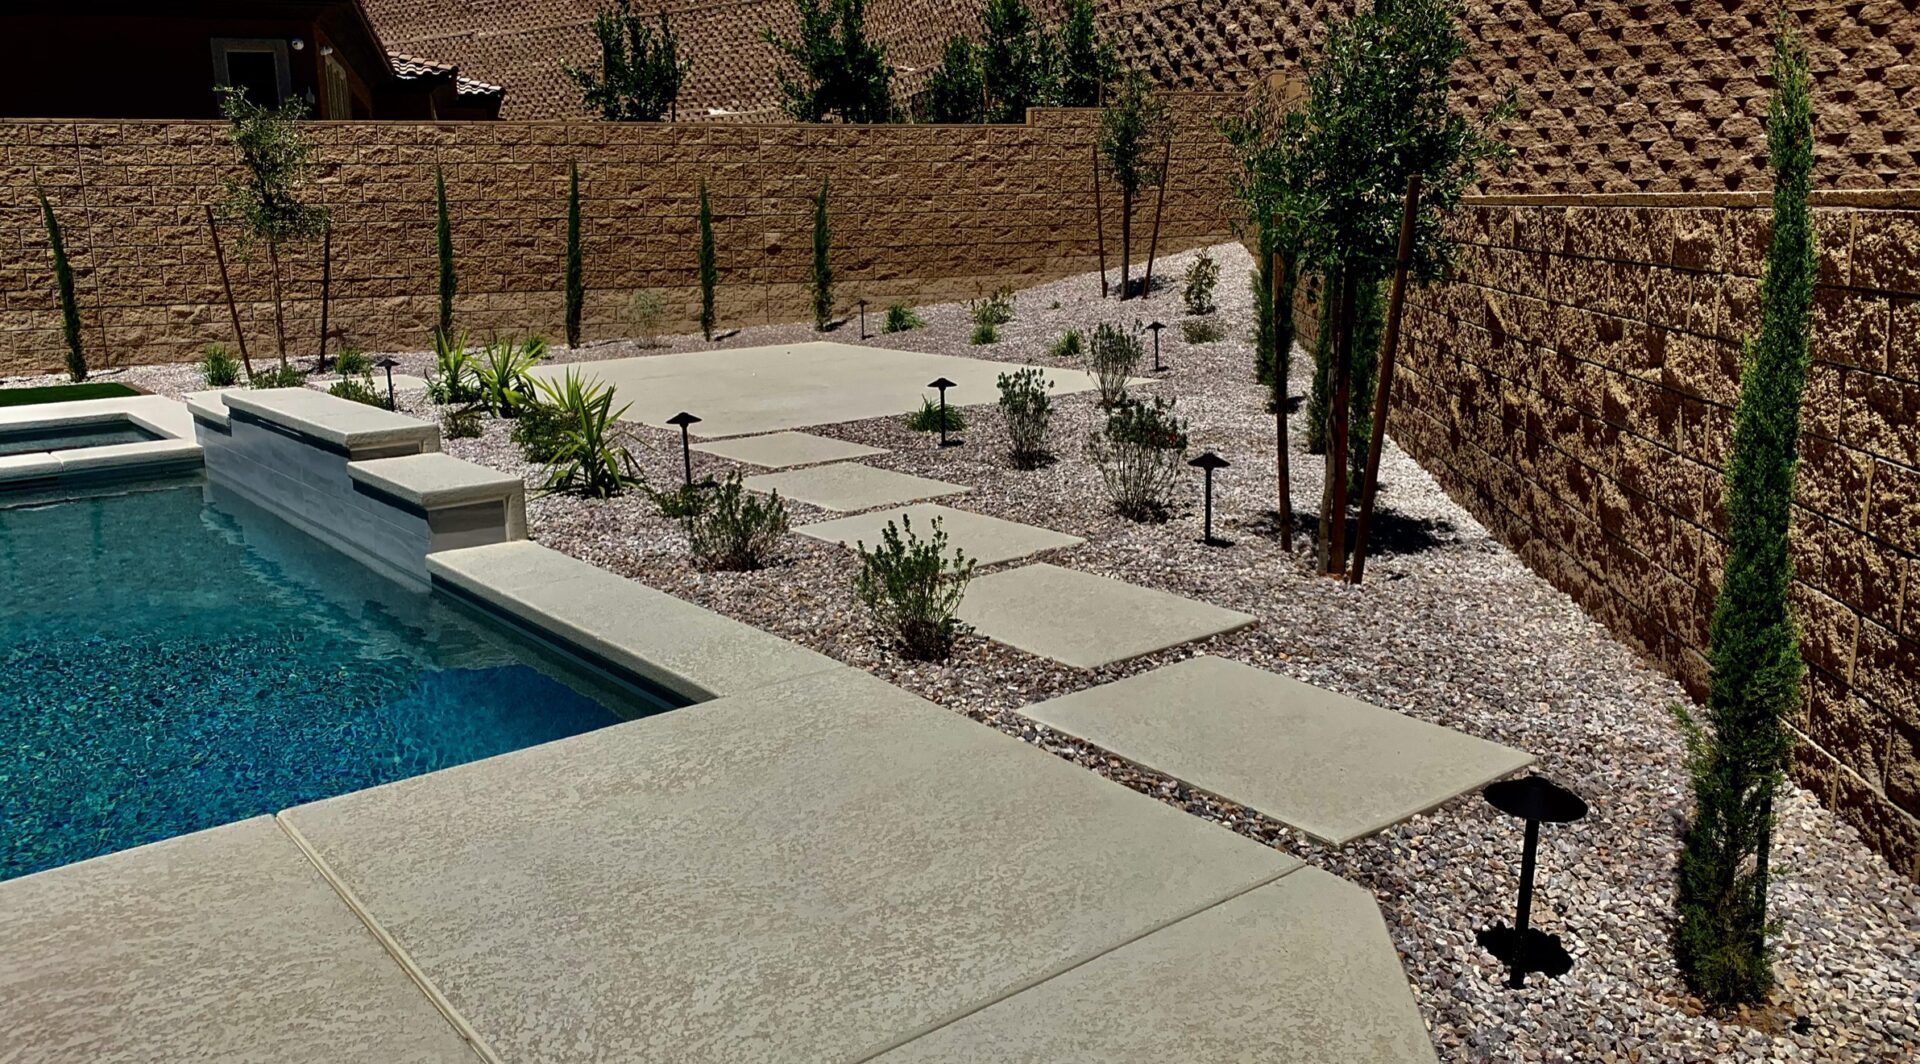 A pool area with a stone wall and gravel.